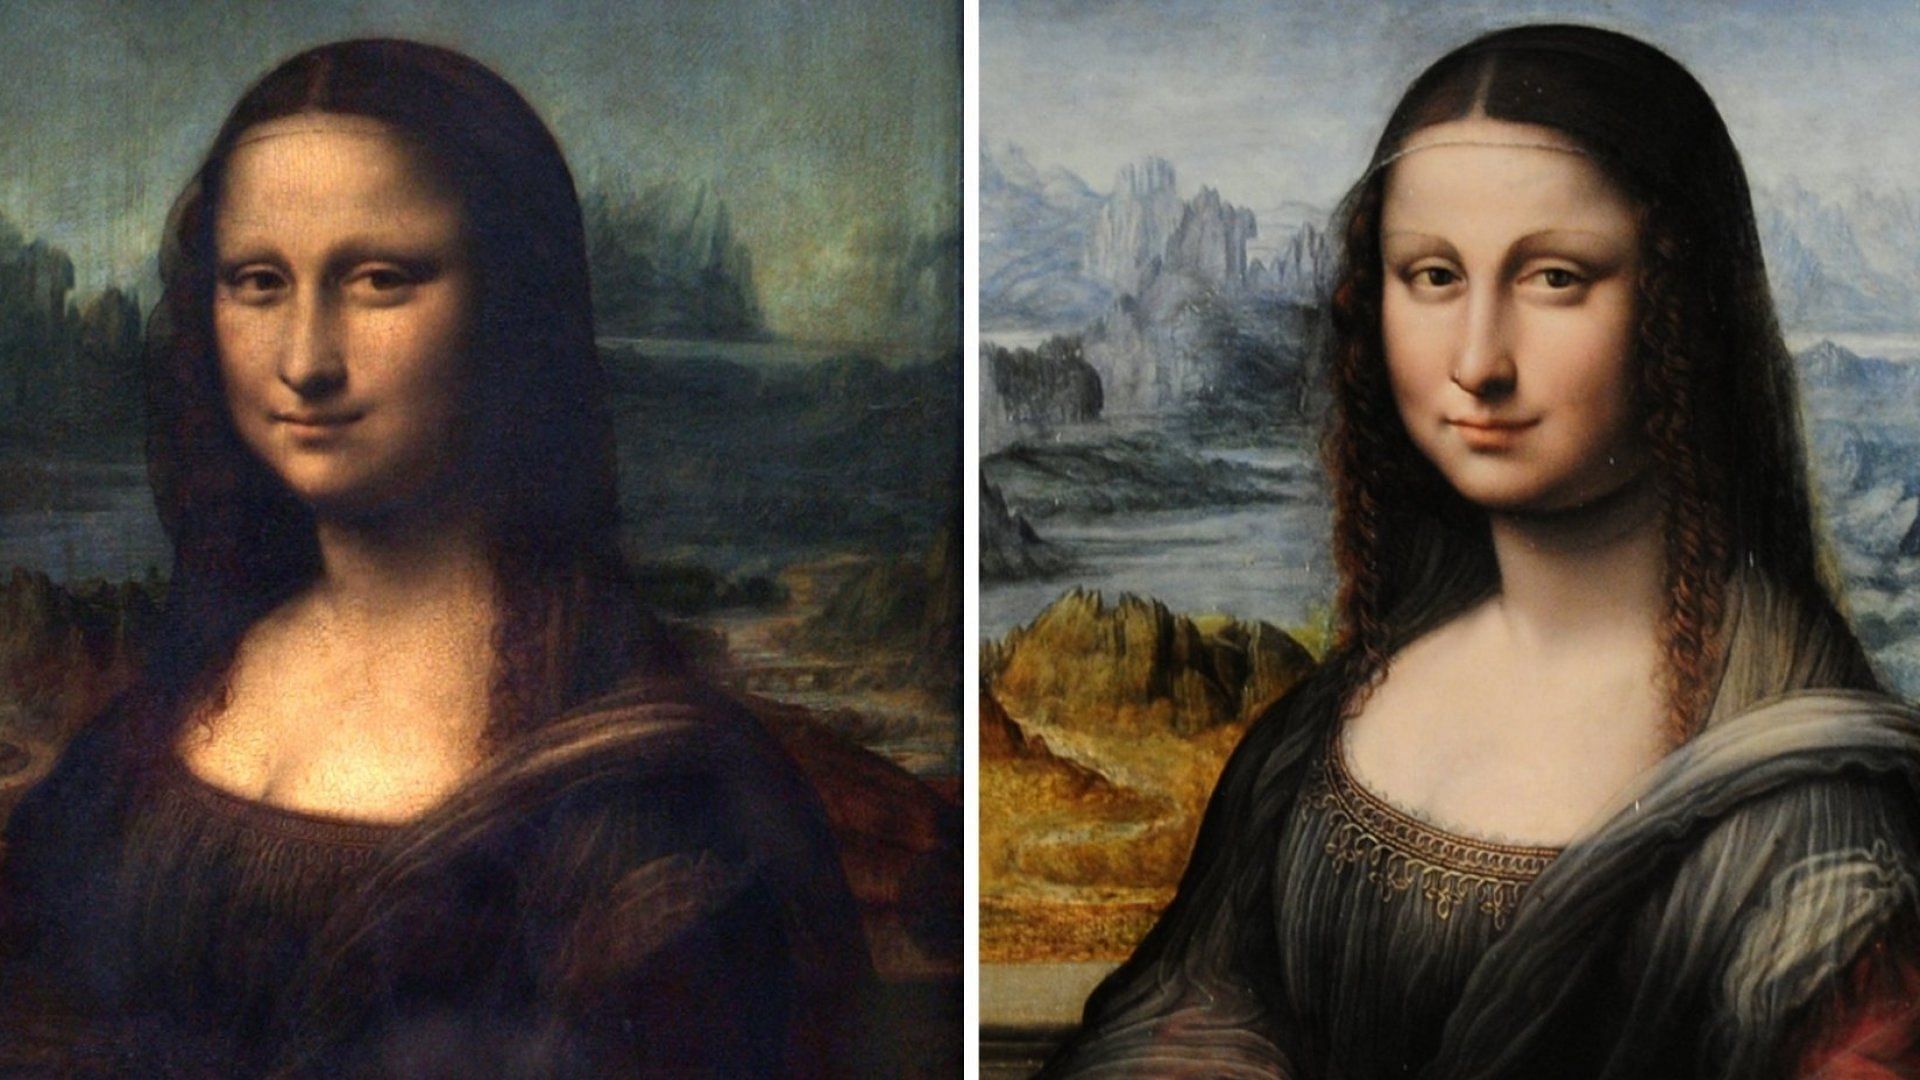 The Mona Lisa portrait was painted by Leonardo da Vinci in the 16th century ( Image via Getty Images)